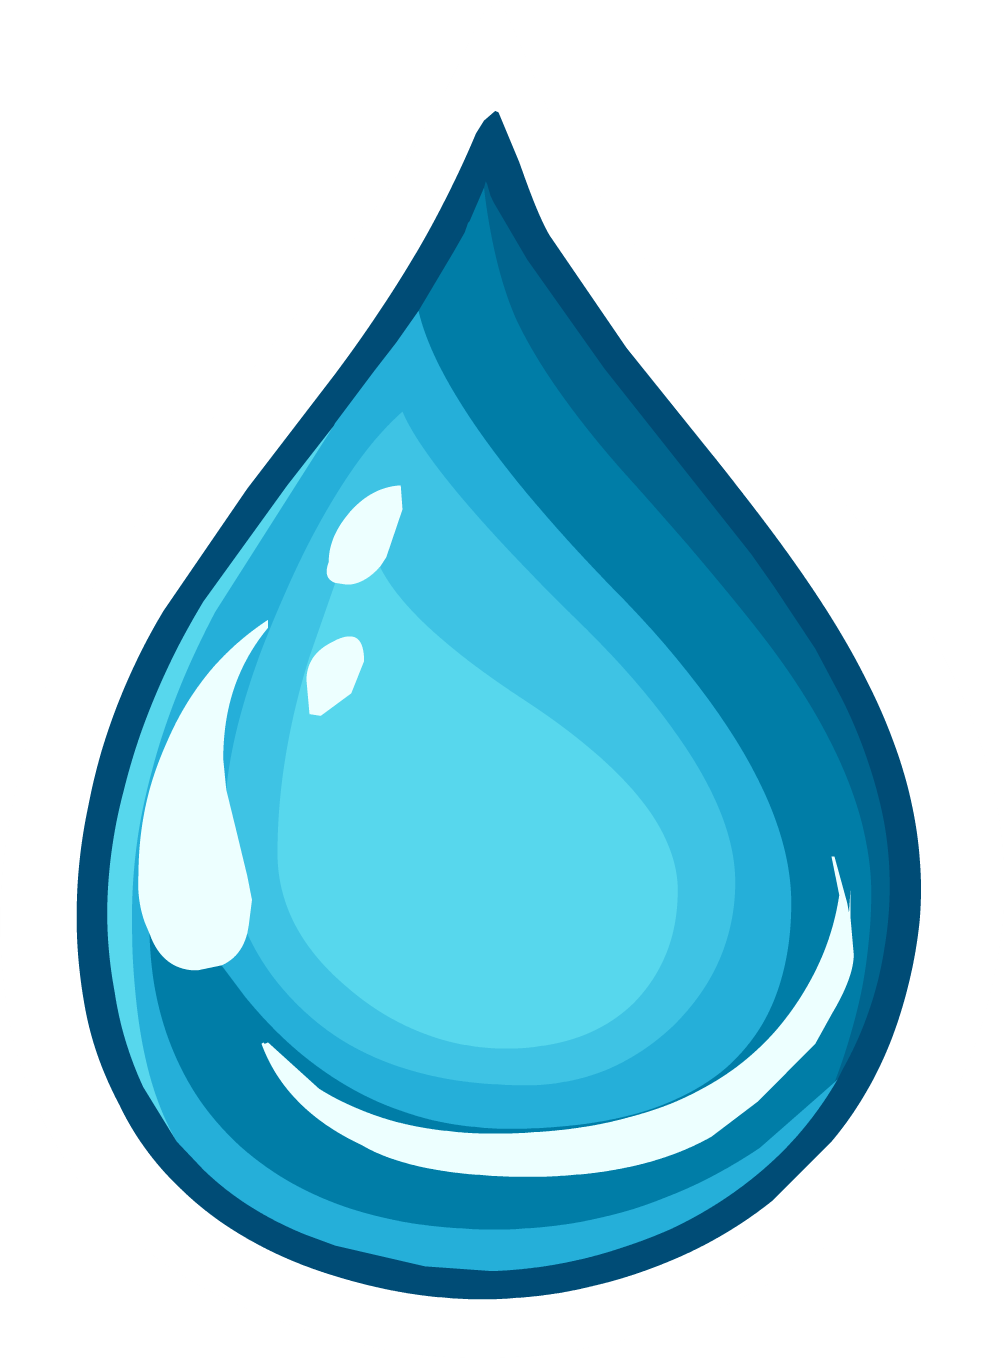 Club Penguin Drinking Water Clip Art - Clean Water Icon Png (1005x1358)